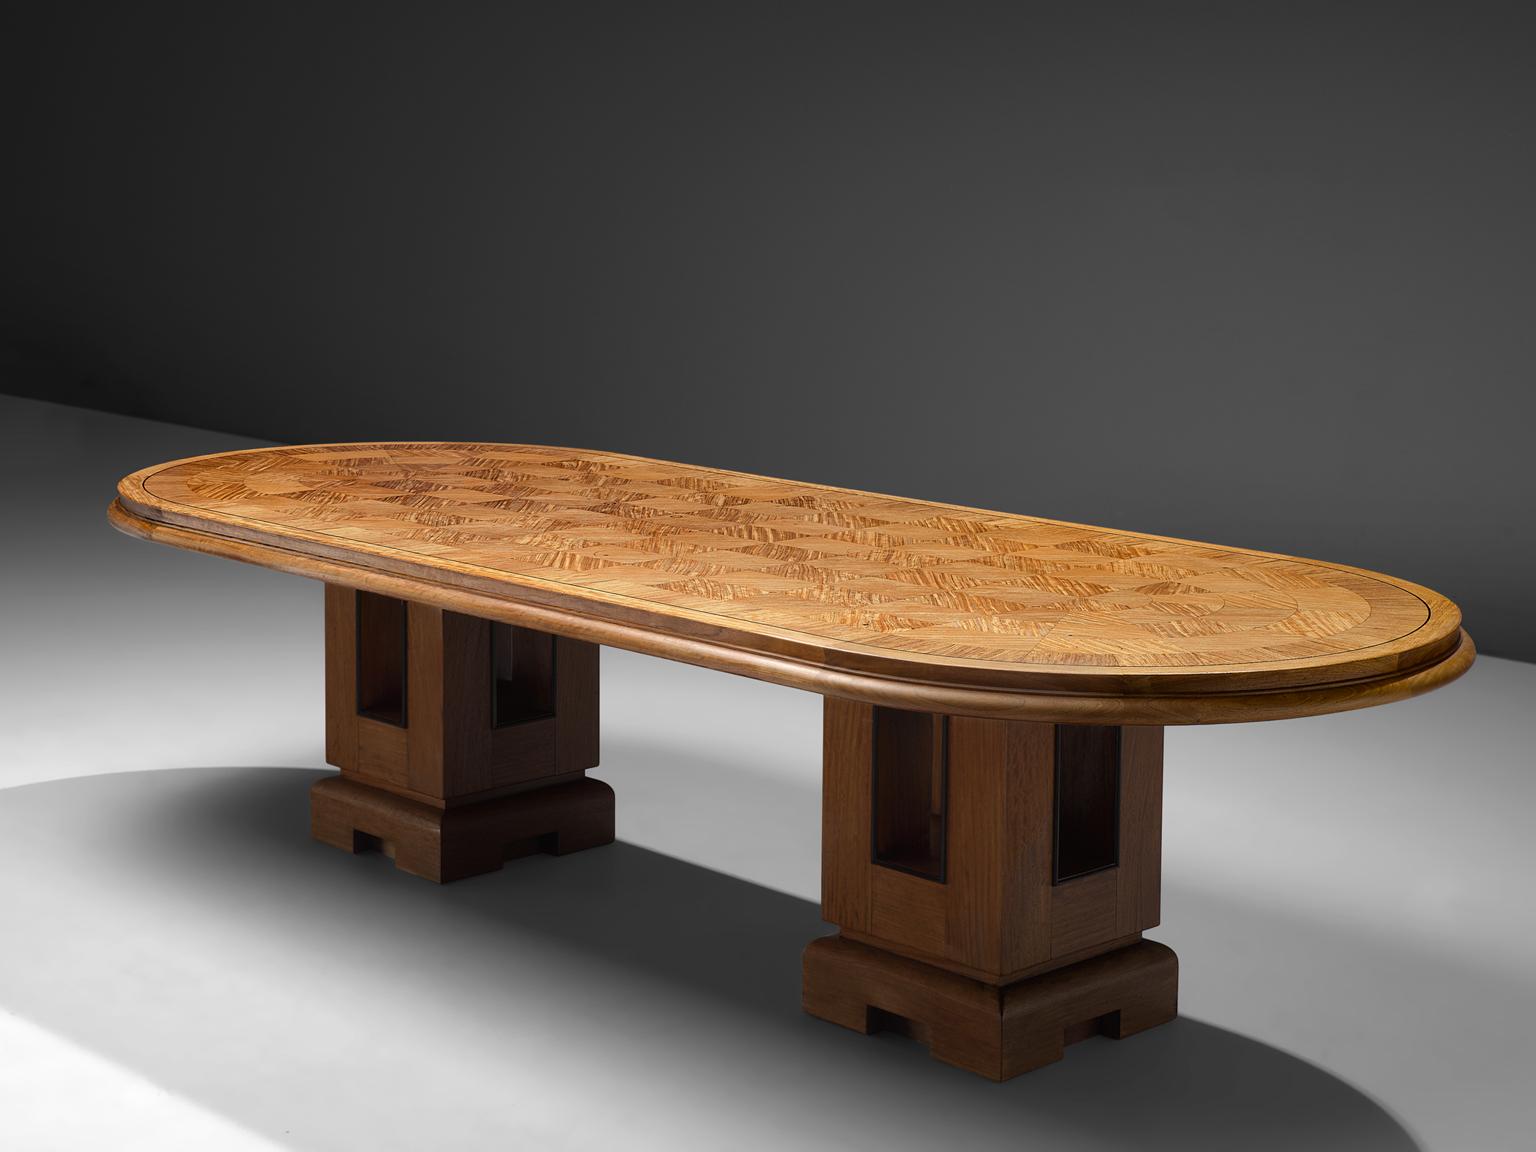 Alfred Chambon, 3 meter dining or conference table in oak, France, 1930s.

This custom made large Art Deco table is made by Alfred Chambon. It has been executed with a very detailed wooden inlay on top. It shows great craftsmanship, as can be seen